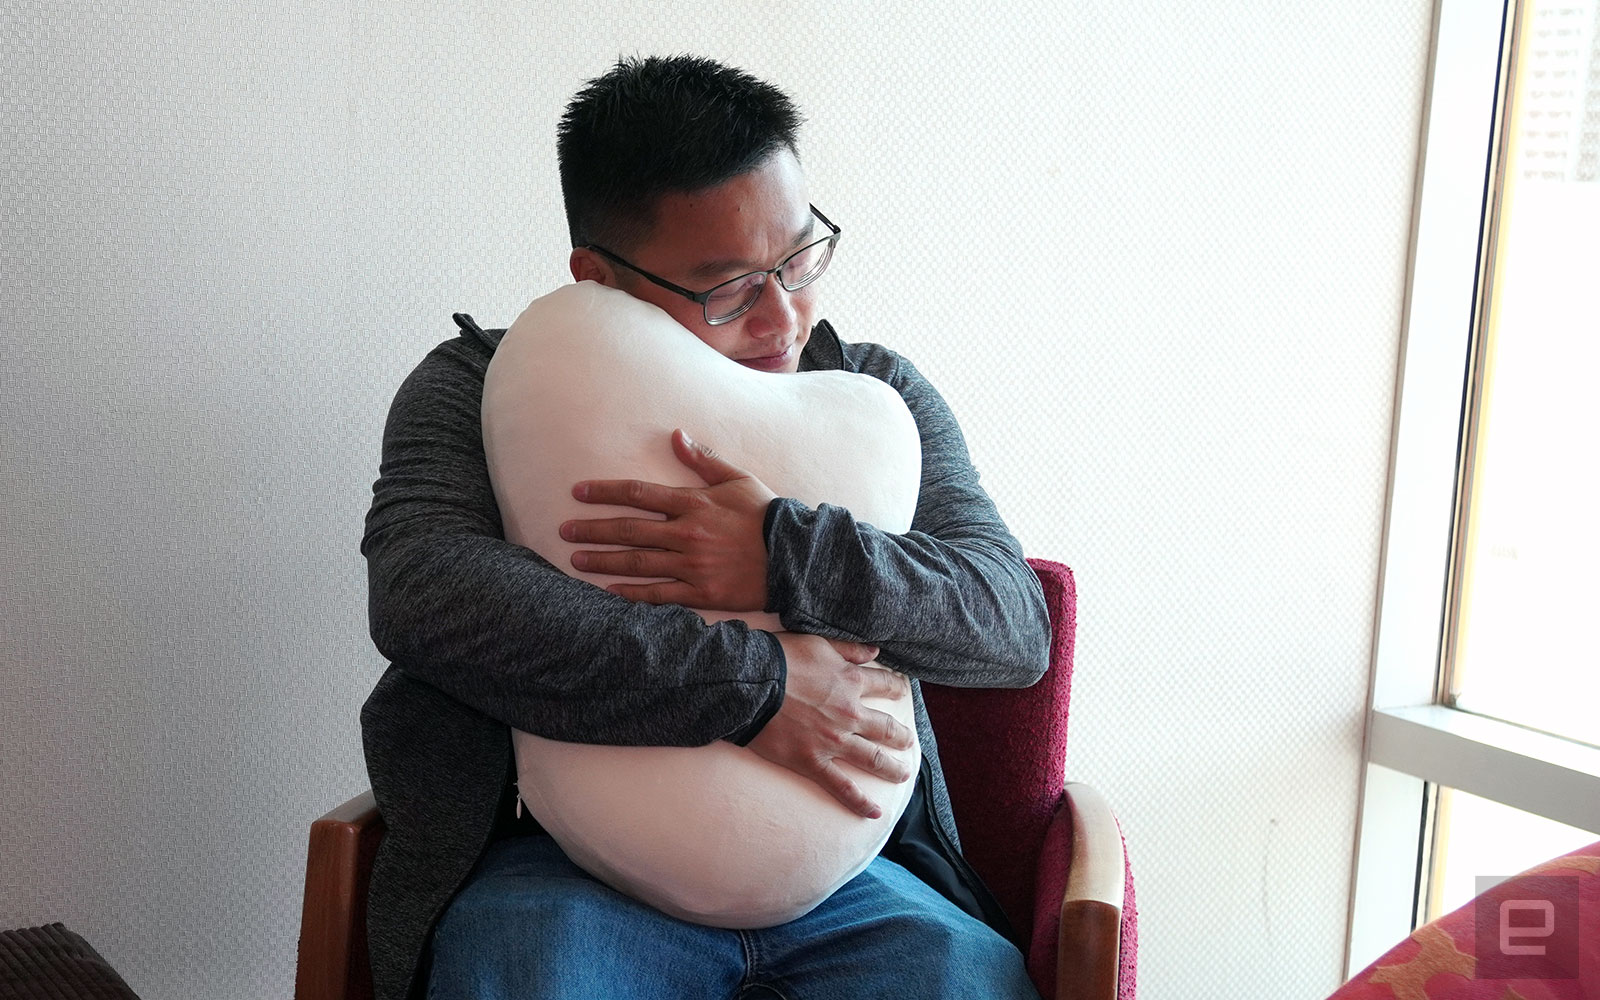 Hugging this pulsating cushion apparently suppresses your anxiety